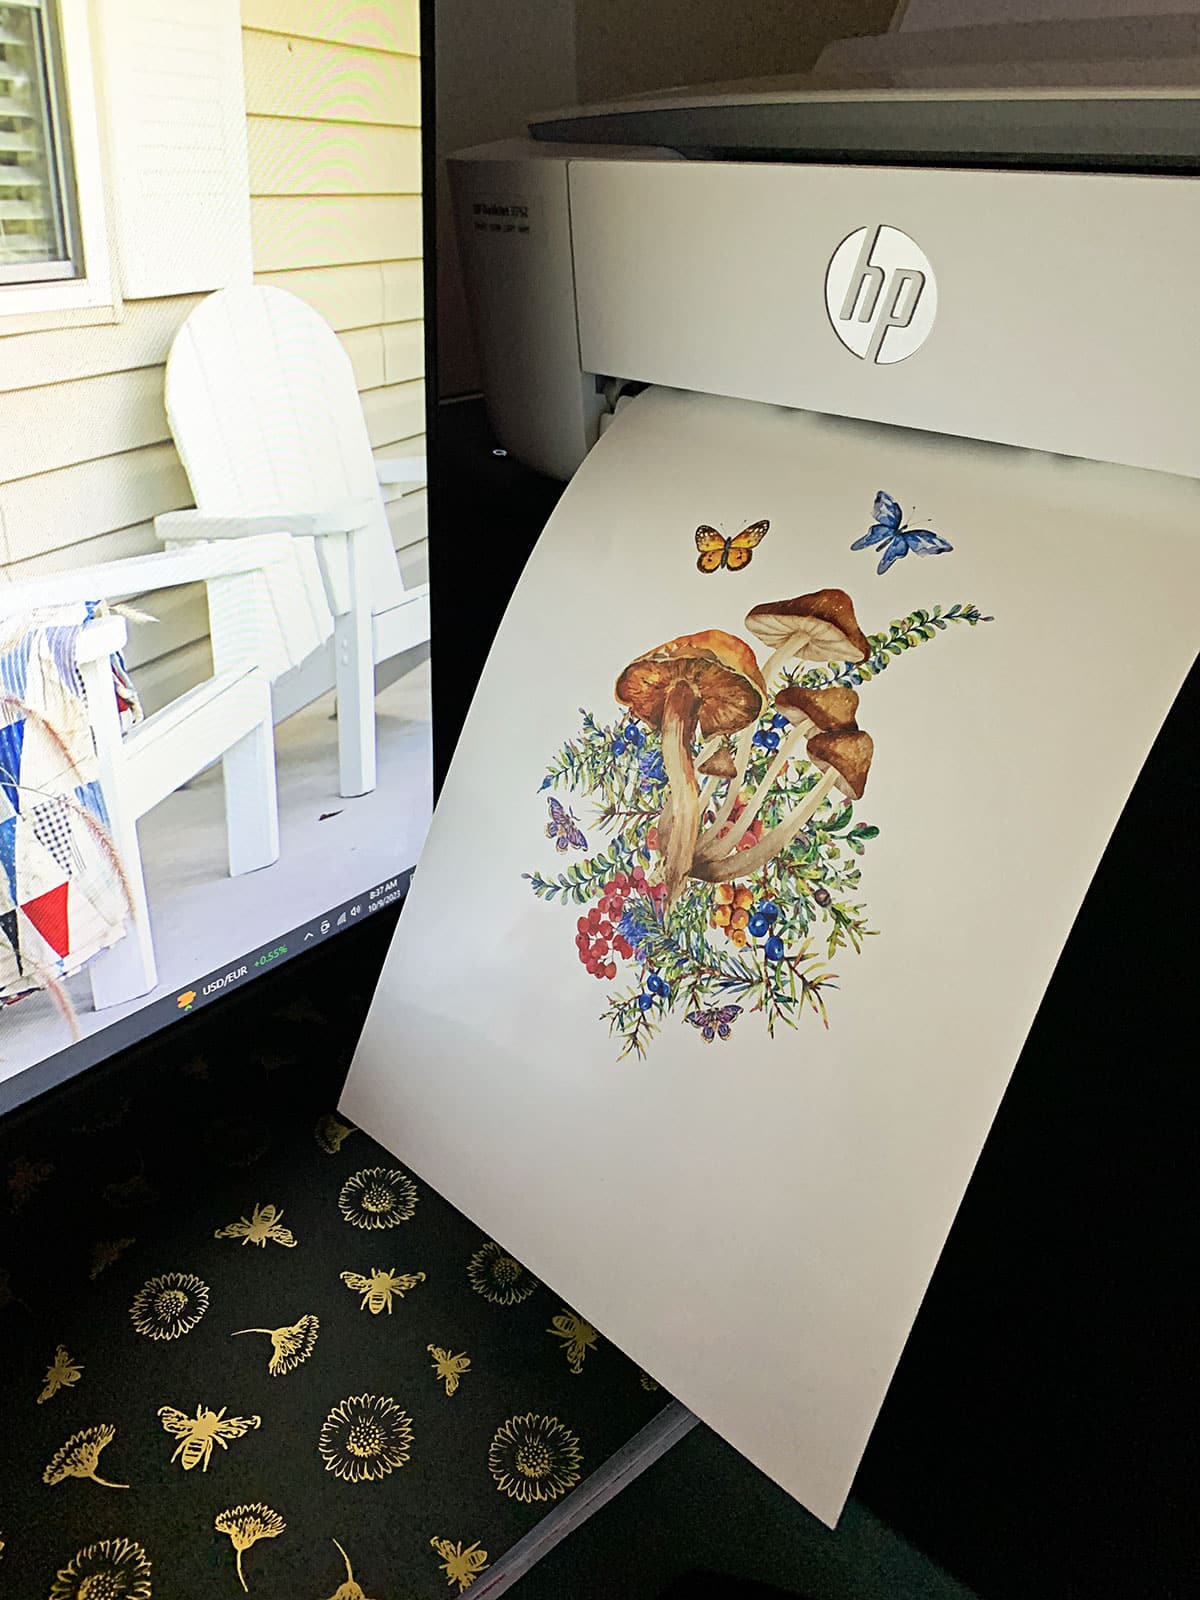 Printing the decal on an HP printer.